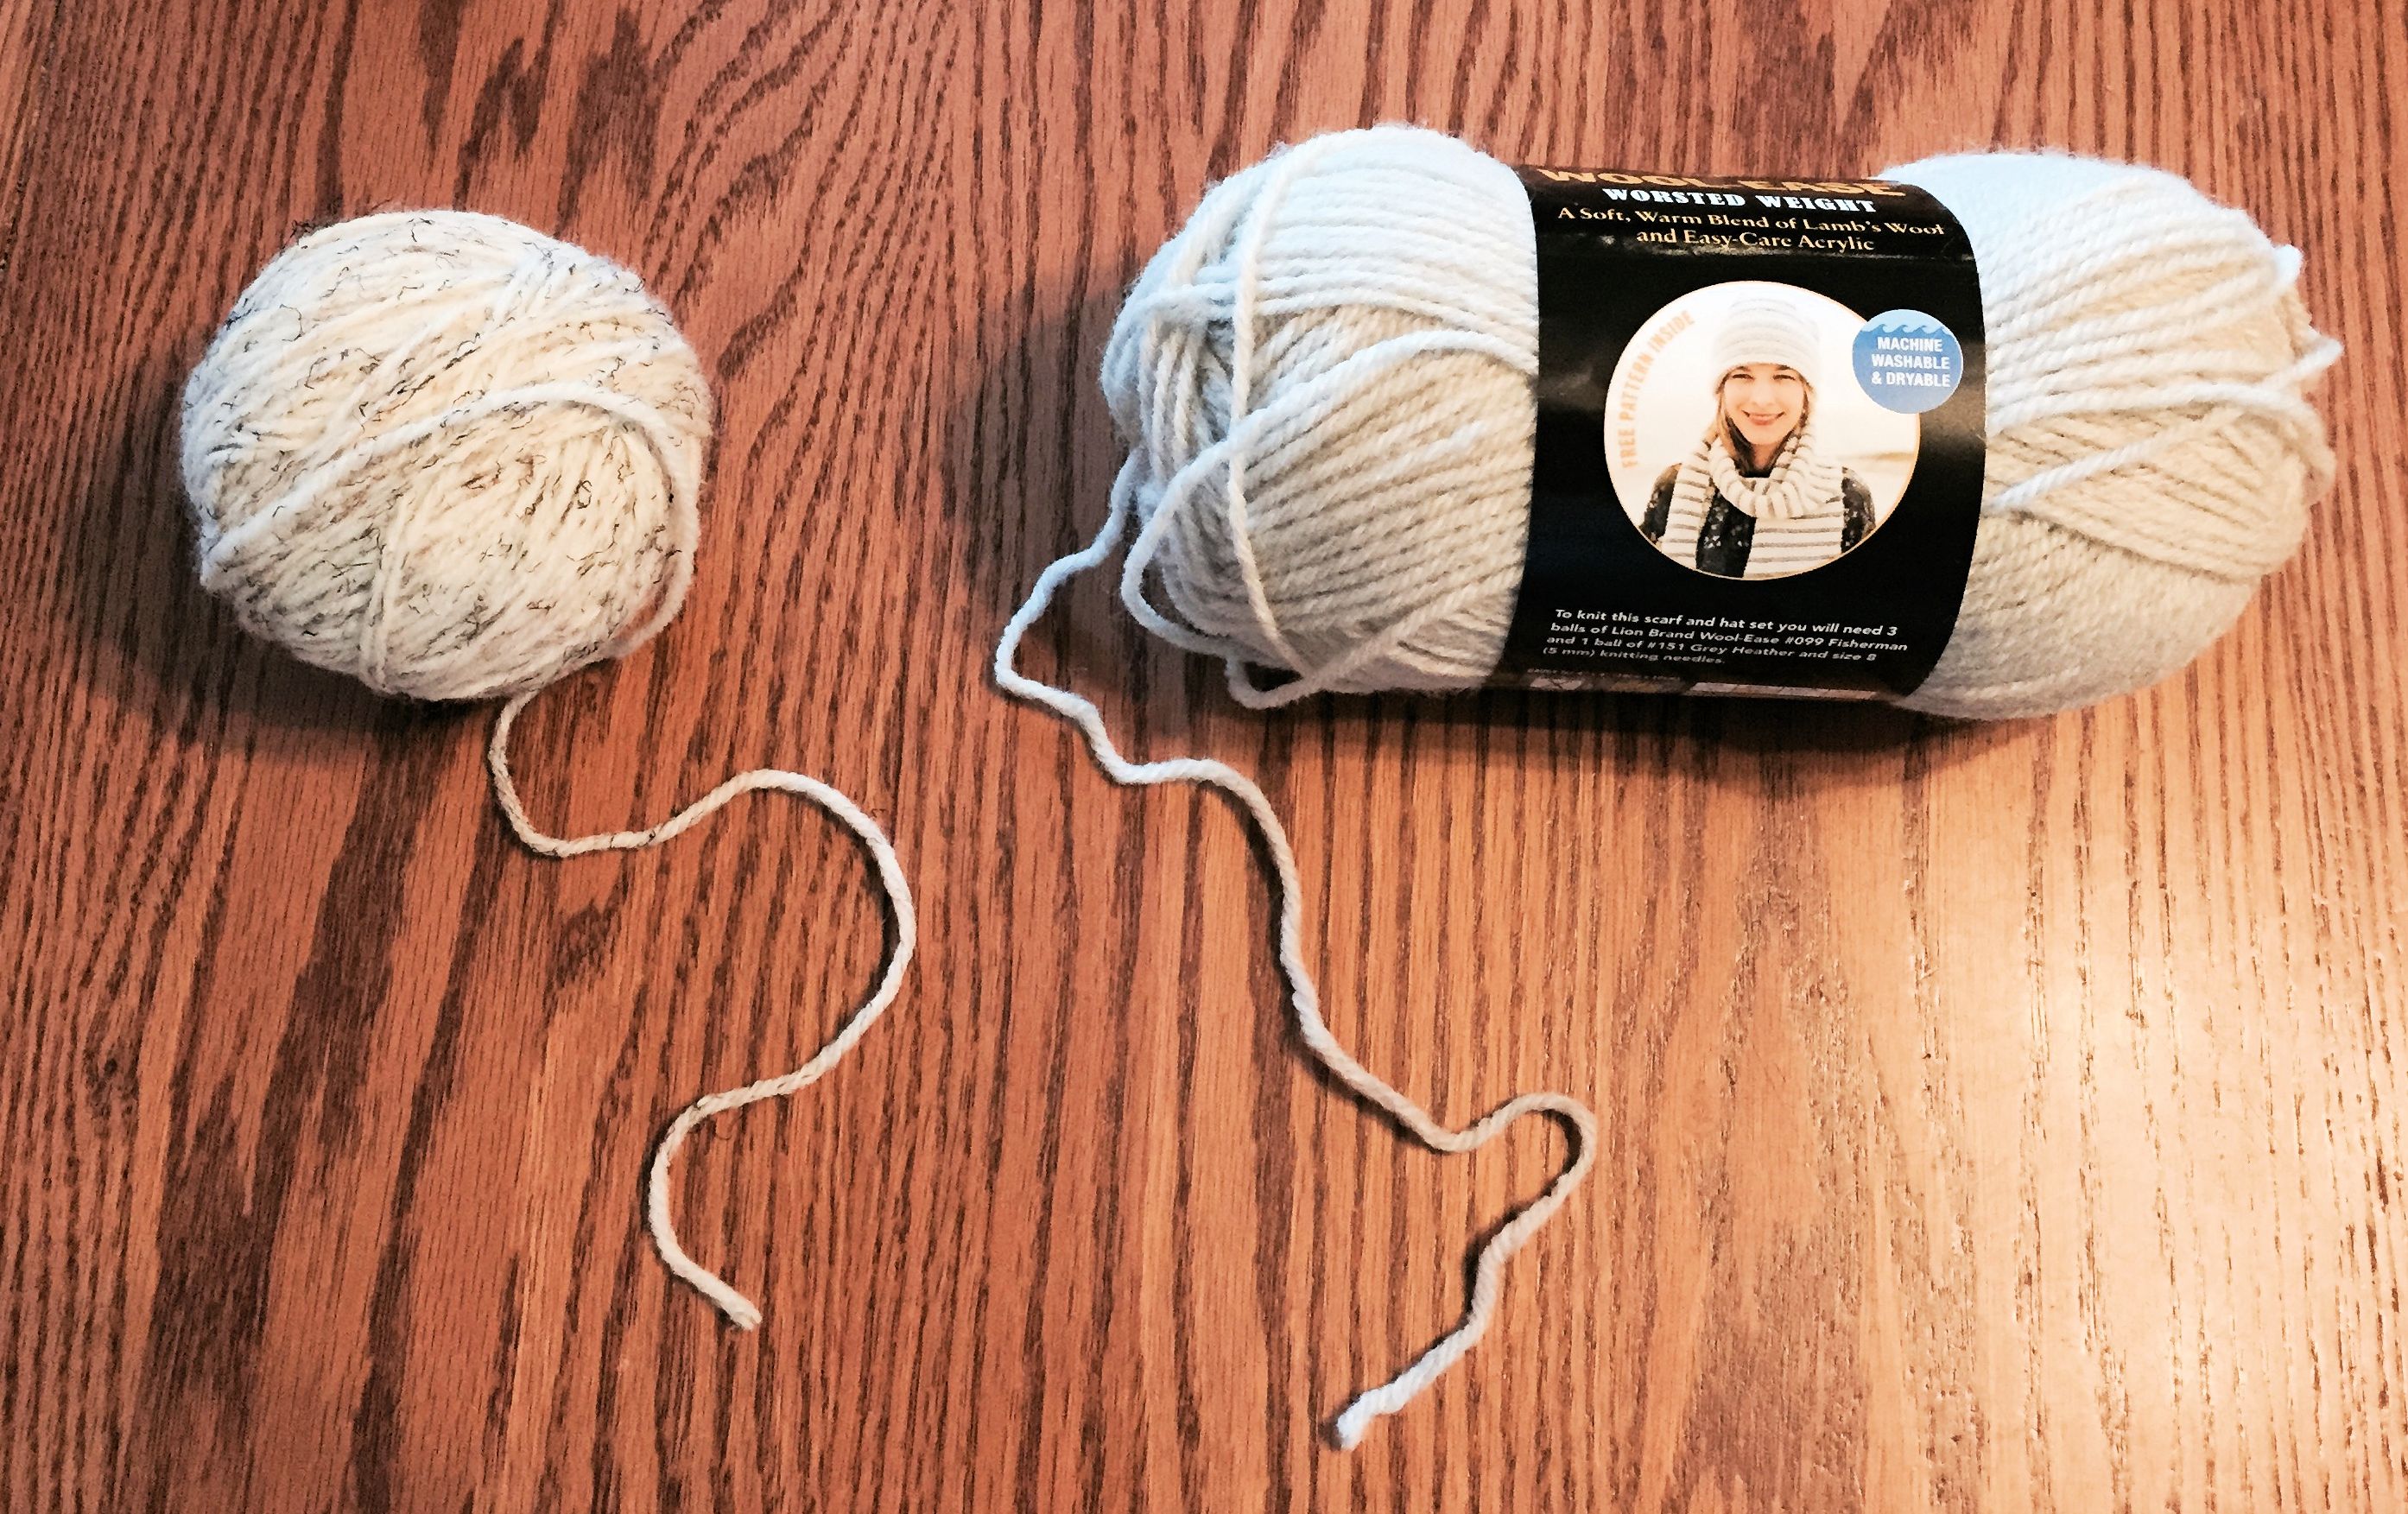 What's the correct way to pull yarn from a skein? – Judy Nolan